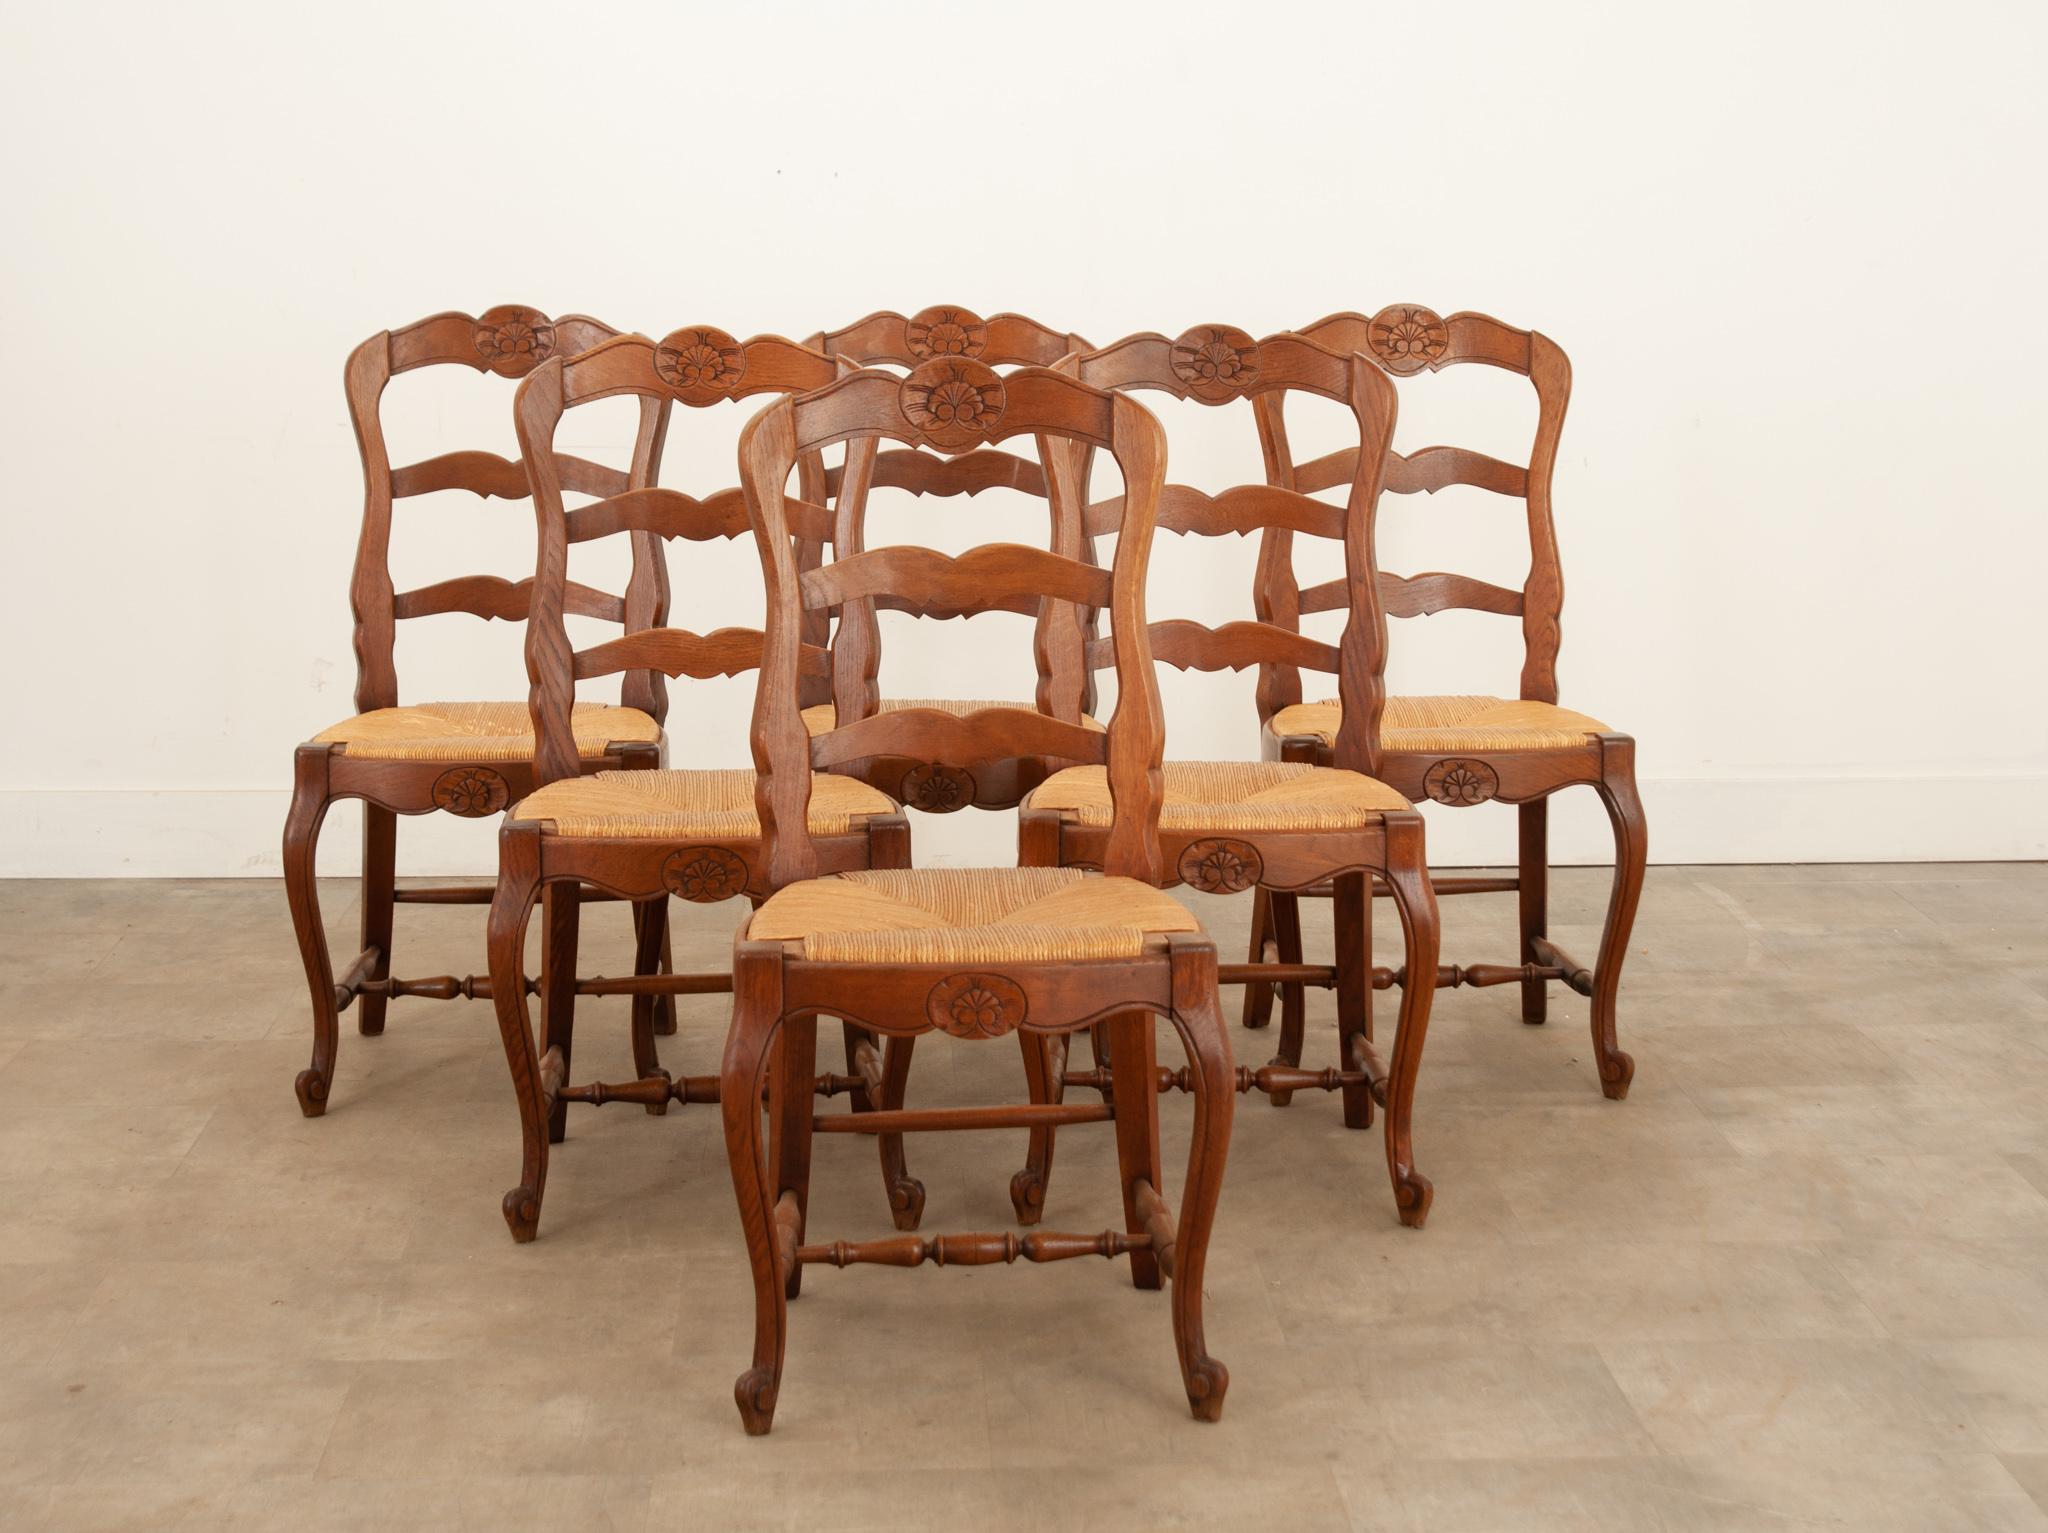 A charming set of six French oak ladder back chairs made in the 1940s. A beautiful carved shell cartouche graces the chairs’ top and front rails. The rush seats are in excellent antique condition and have a height of 18 1/2?. The seats are